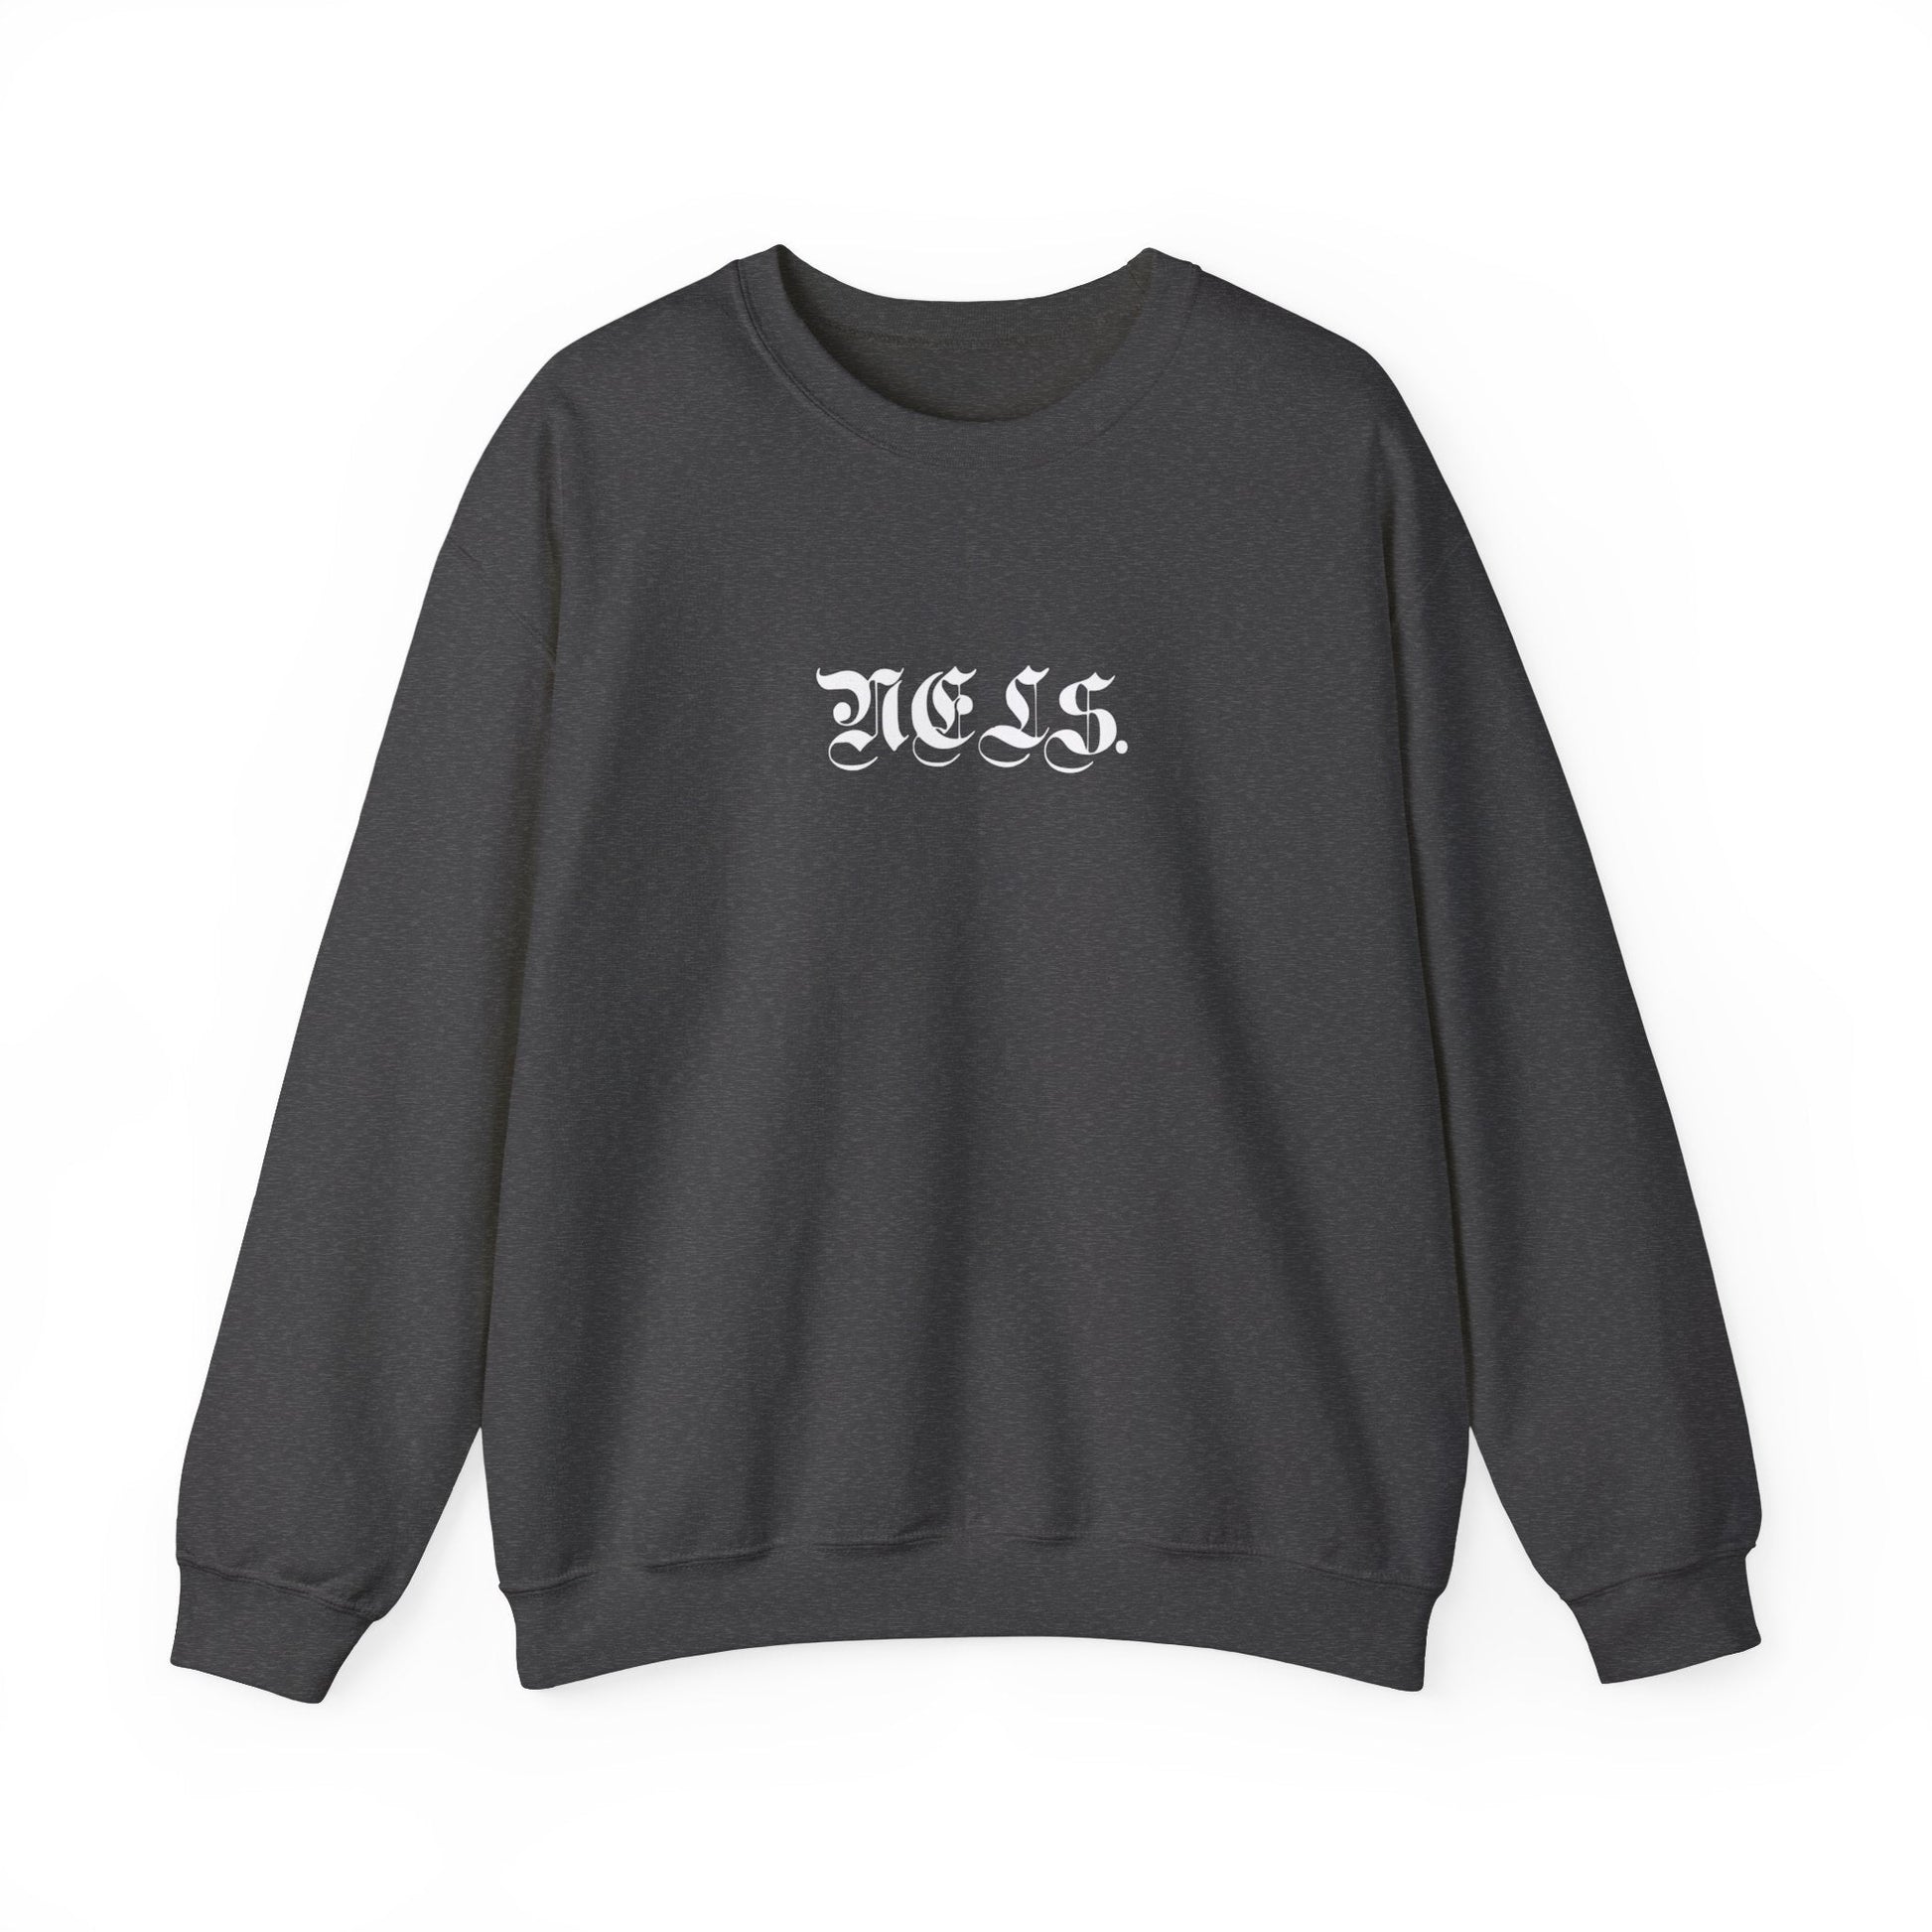 Sweatshirt NELS. Live Life In Full Bloom Front and Back - NELS.